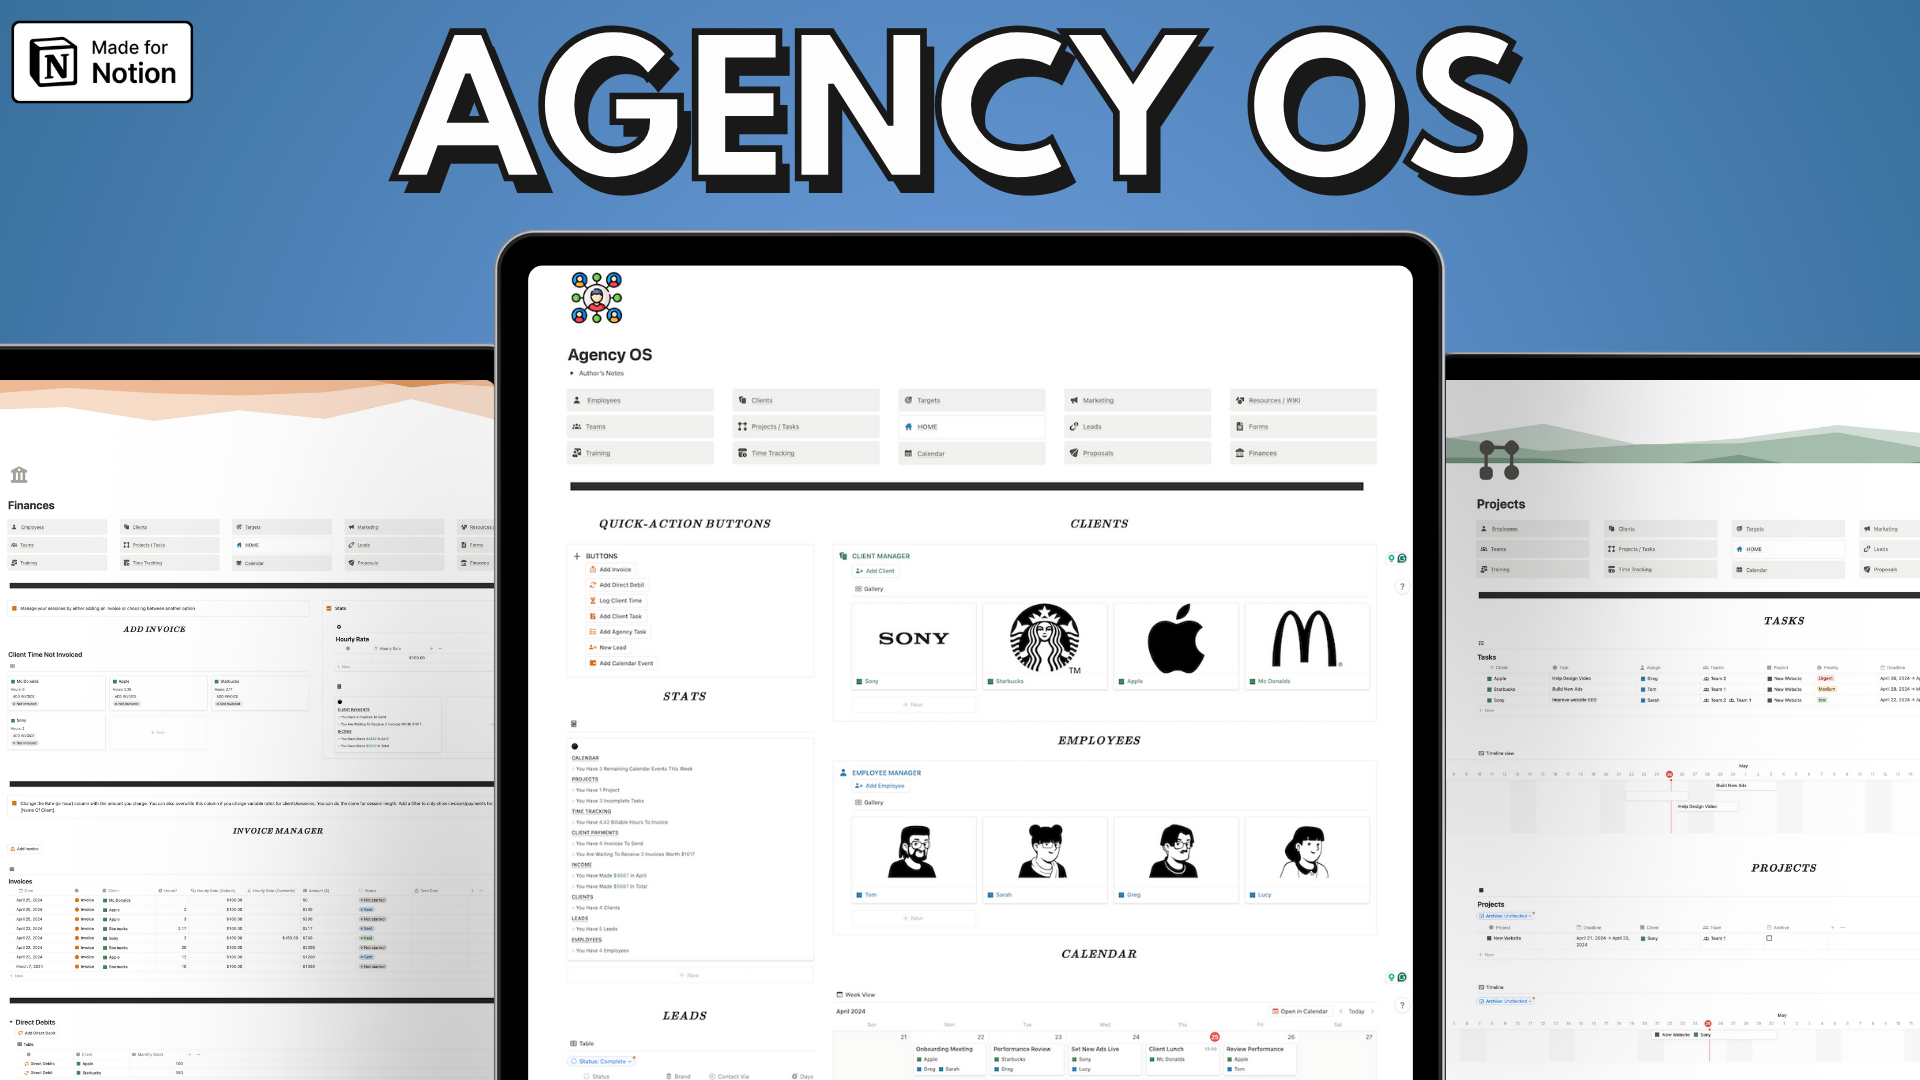 Agency OS is your all-in-one business management solution, designed to streamline operations and enhance productivity for your agency. With features ranging from client and employee pages to project tracking and financial oversight, Agency OS upgrades your business.